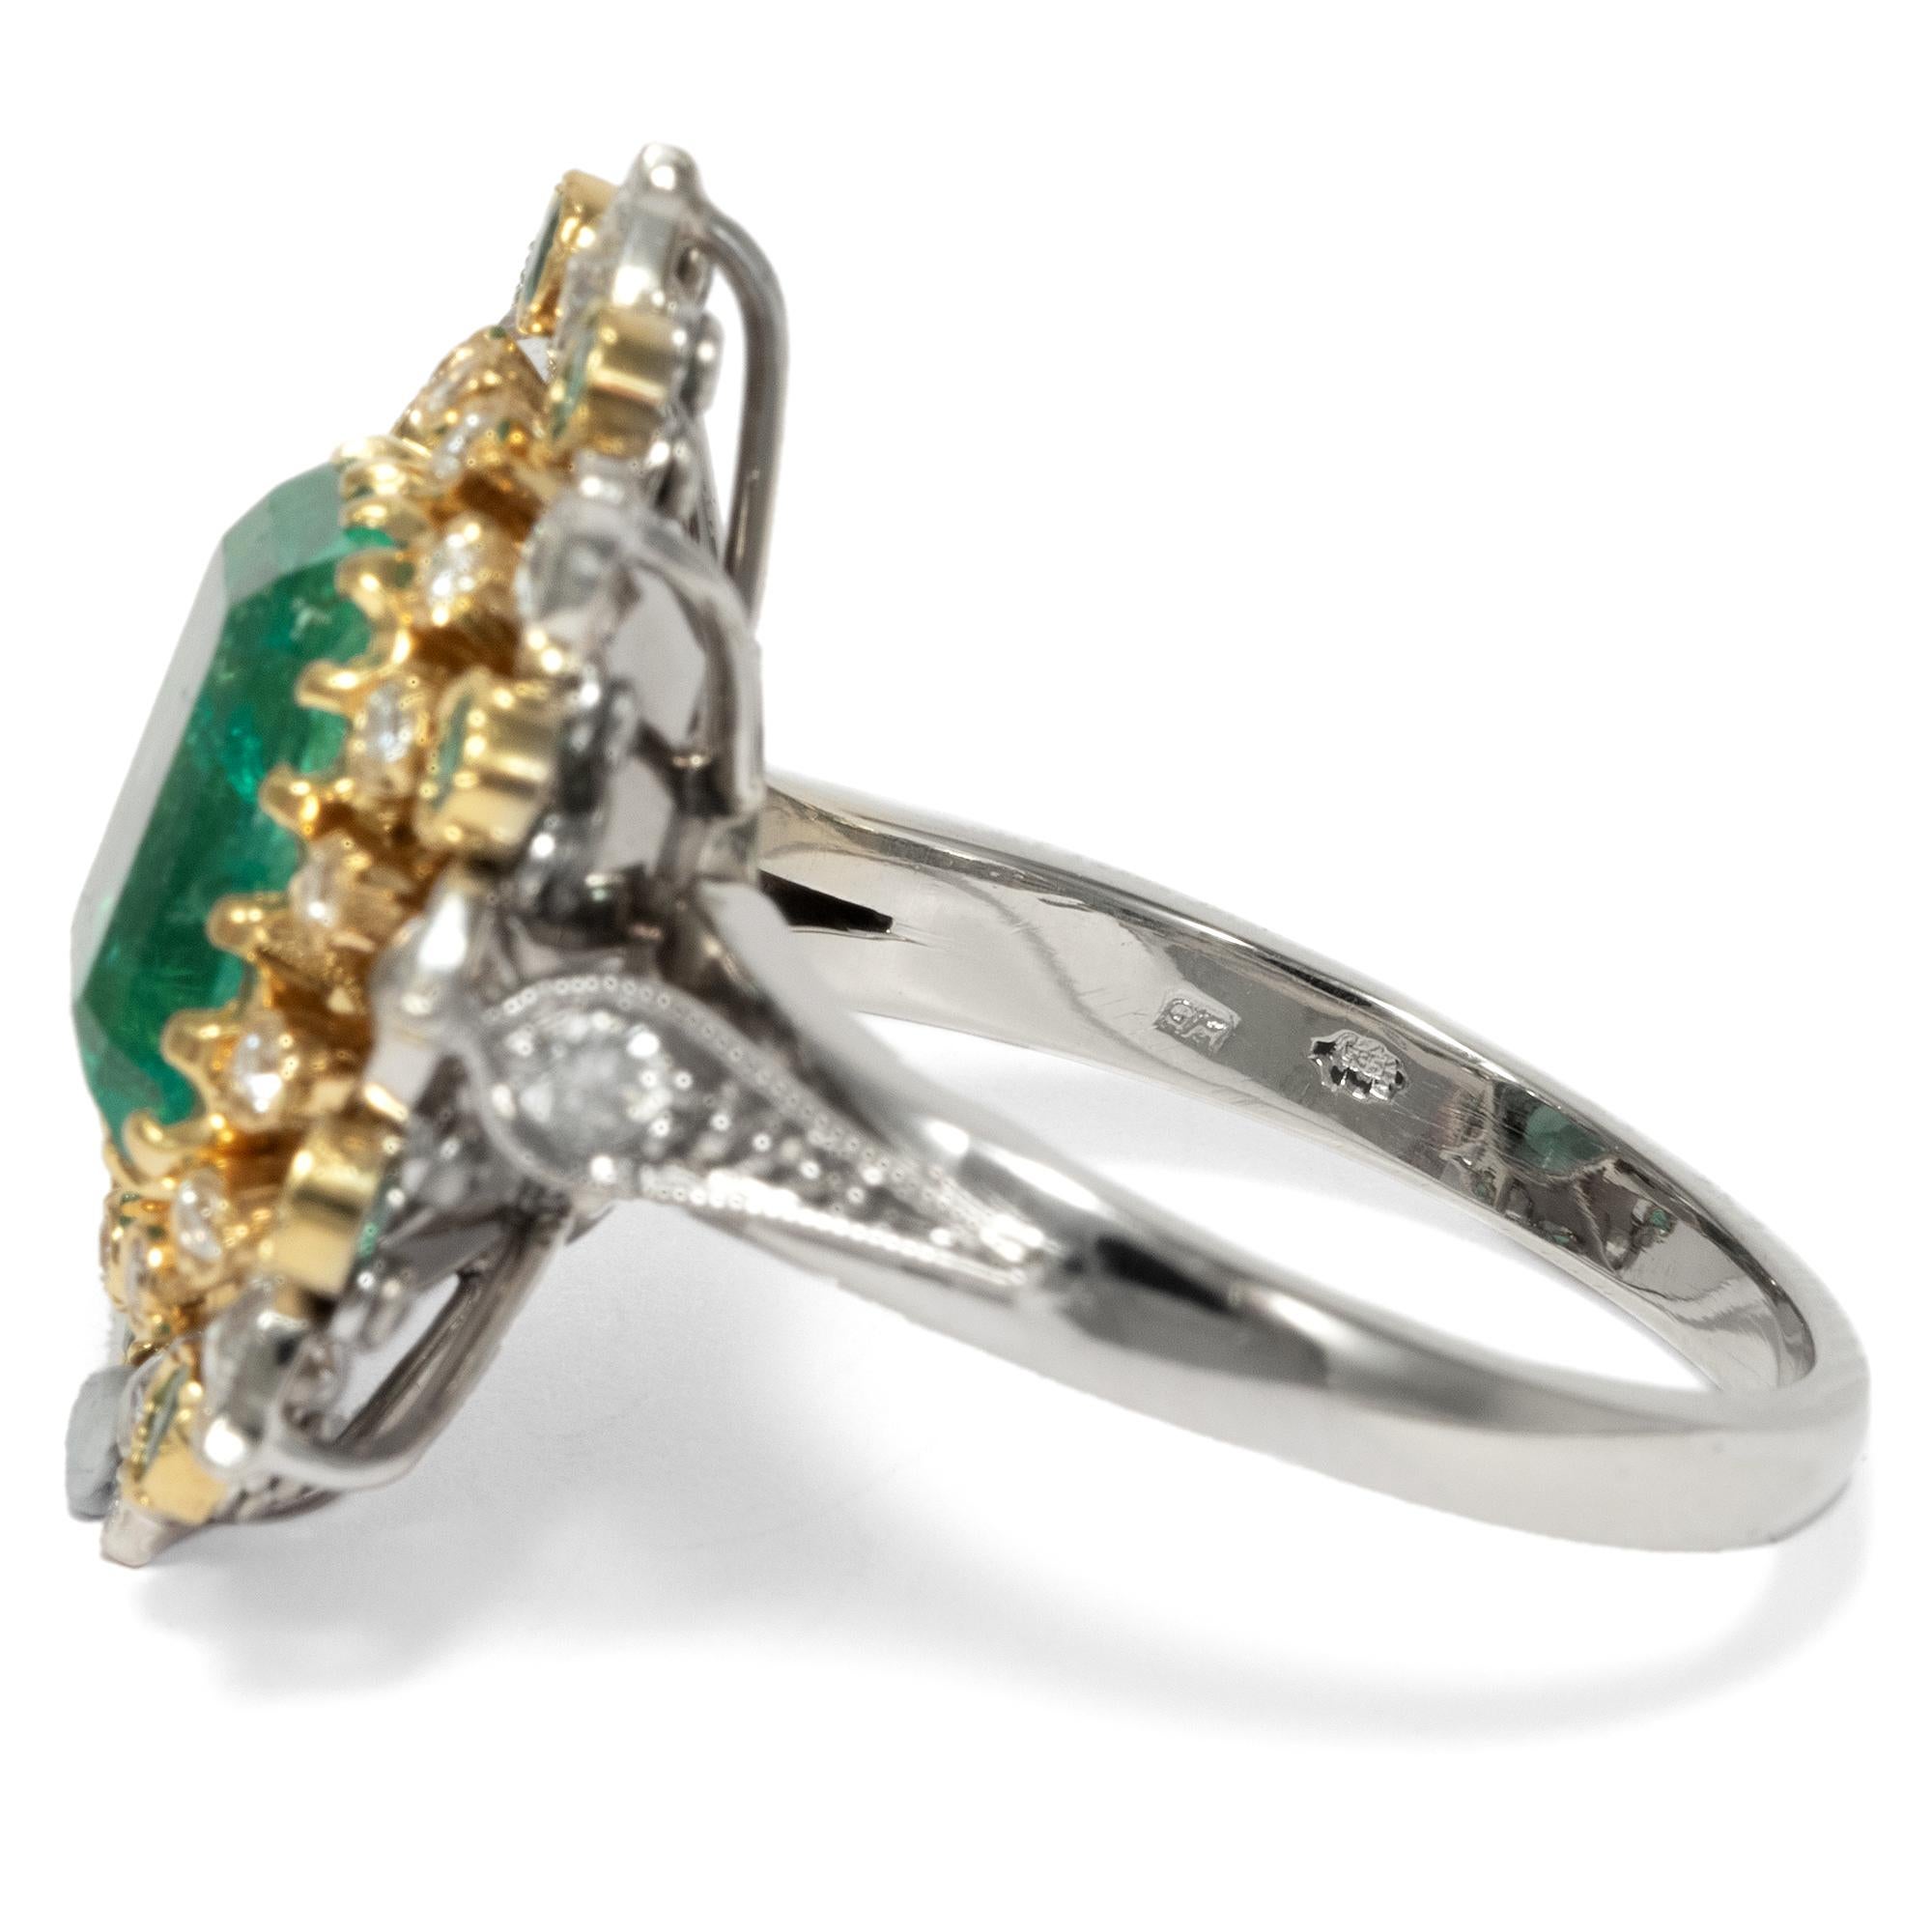 Retro Vintage 1970s Certified 3.9 Carat Emerald Diamond Gold Cluster Cocktail Ring